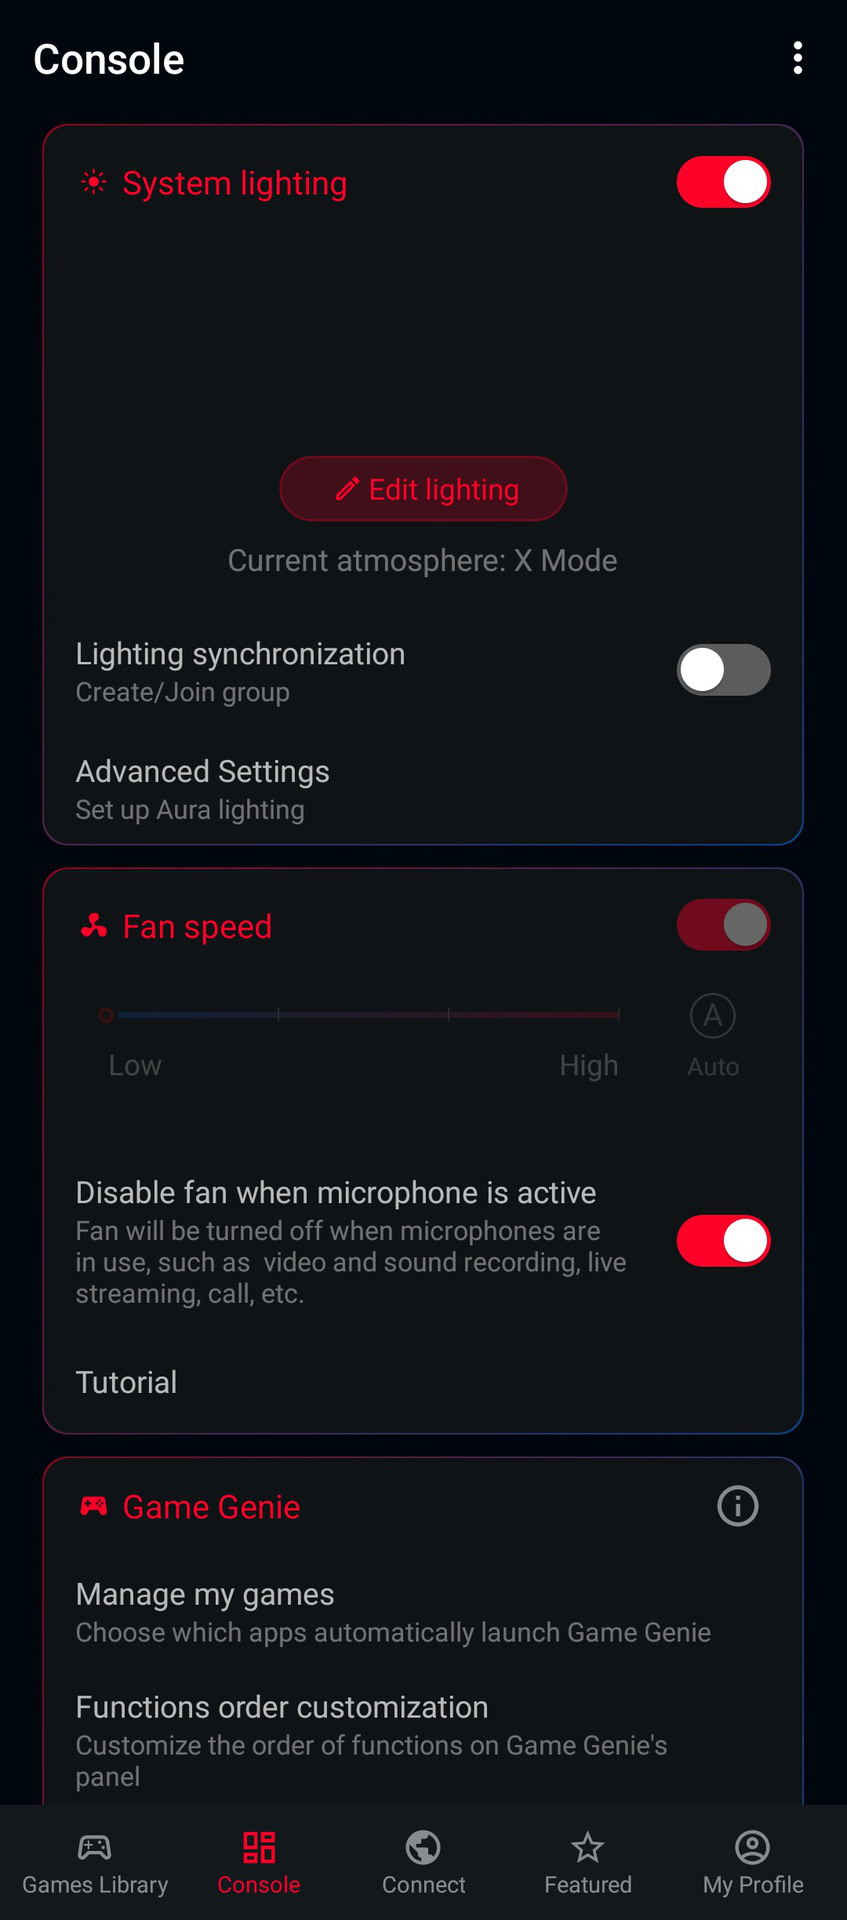 ROG Phone 5 screenshot of more options within the console in Armor Crate